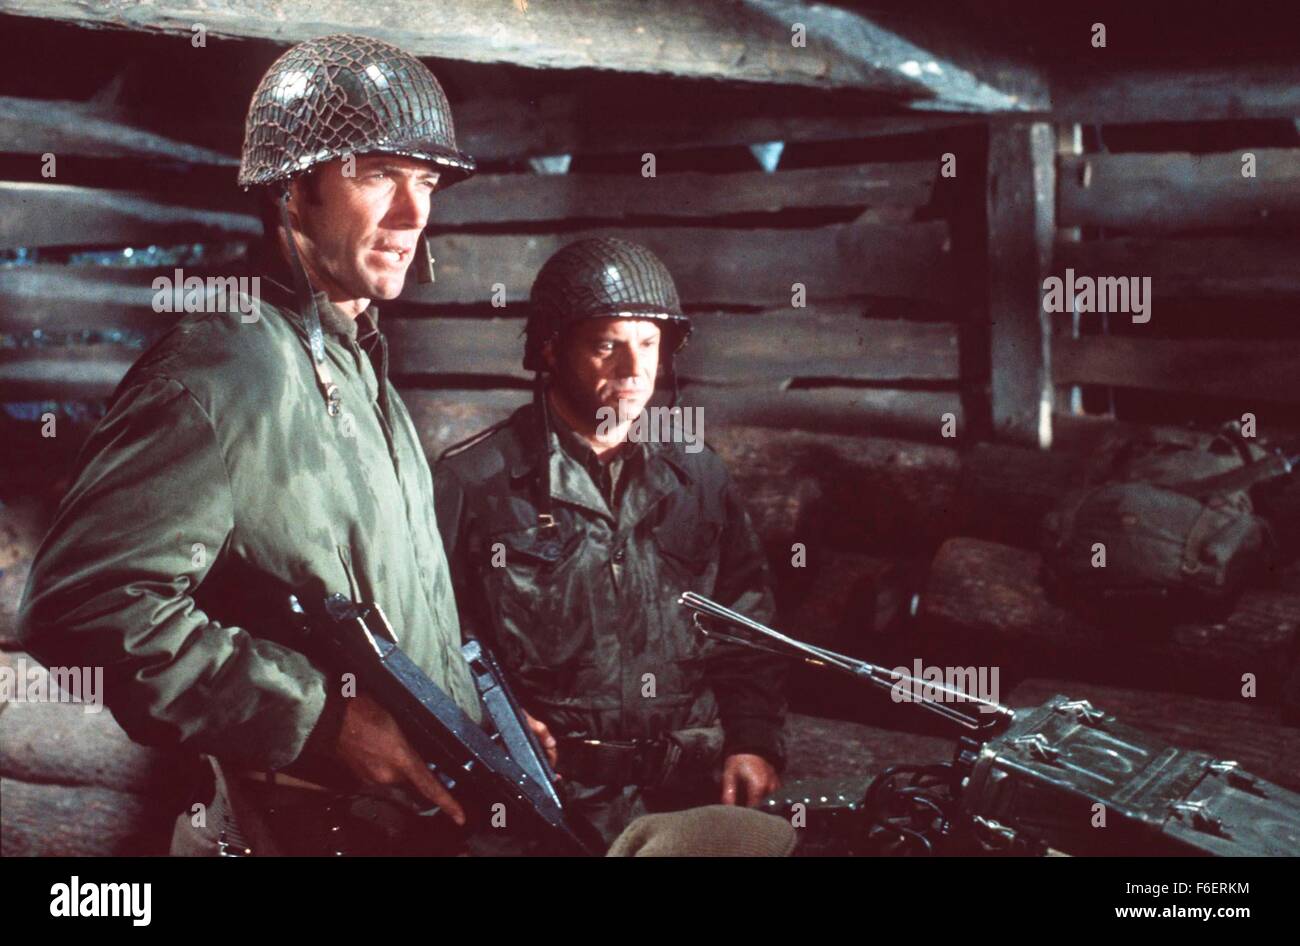 Apr 11, 1970; Hollywood, CA, USA; CLINT EASTWOOD as Pvt. Kelly and DON RICKLES as Staff Sgt. Crapgame in the war, action, comedy ''Kelly's Heroes'' directed by Brian G. Hutton. Stock Photo